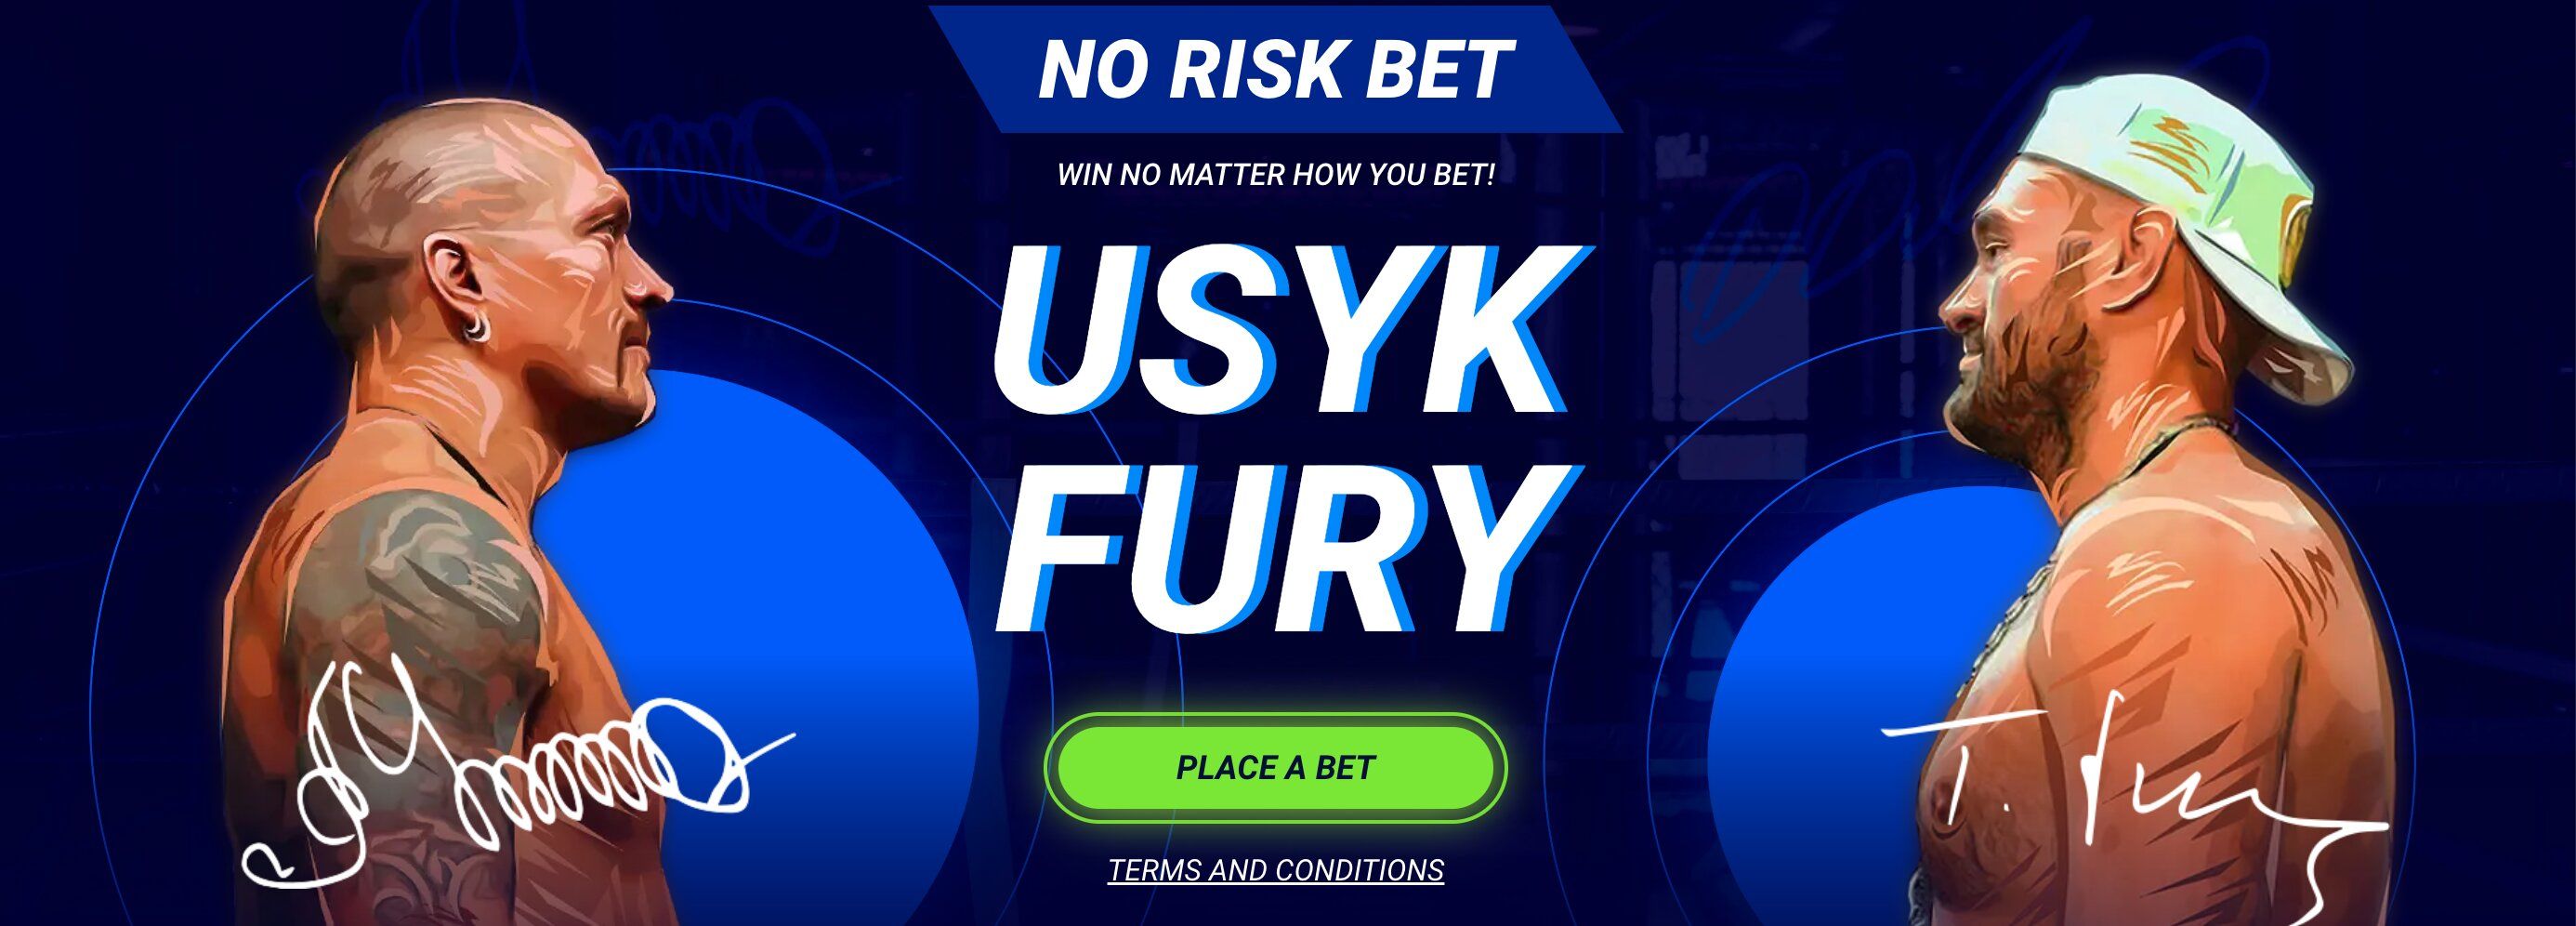 1xBet 20% No Risk Bet on Usyk vs Fury up to 184 EUR